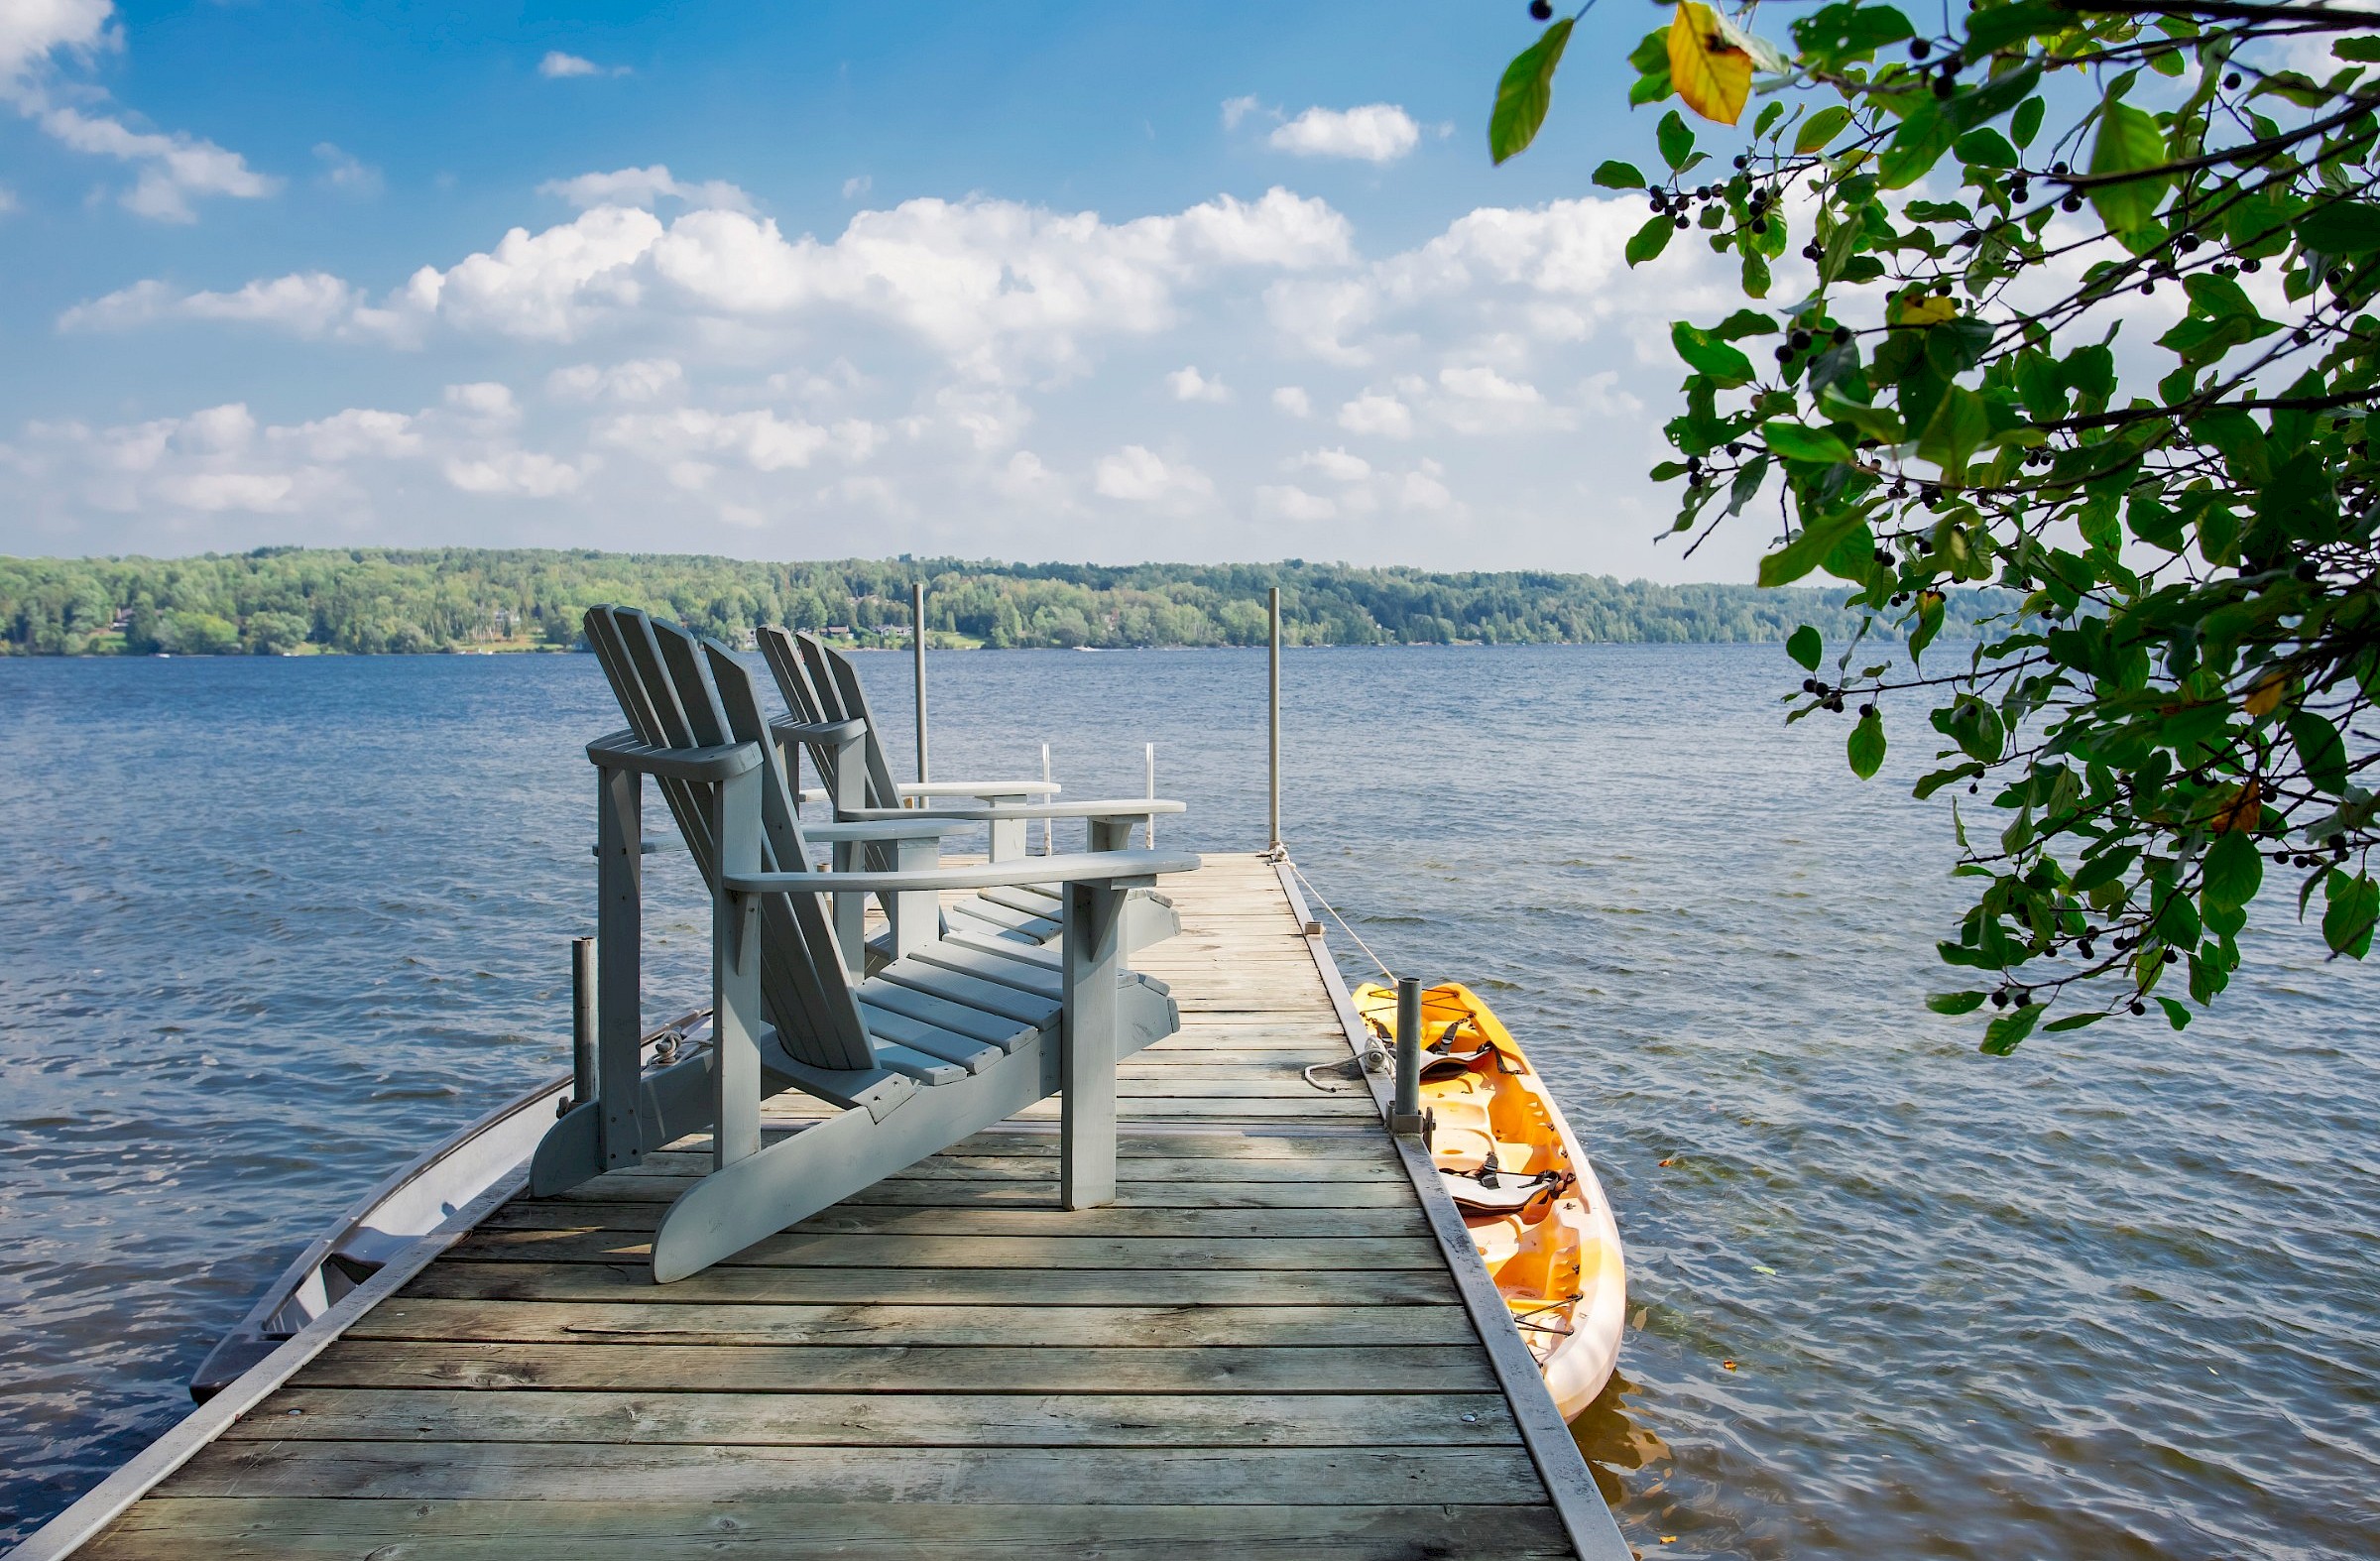 Wooden dock on the lake with two chairs and a kayak